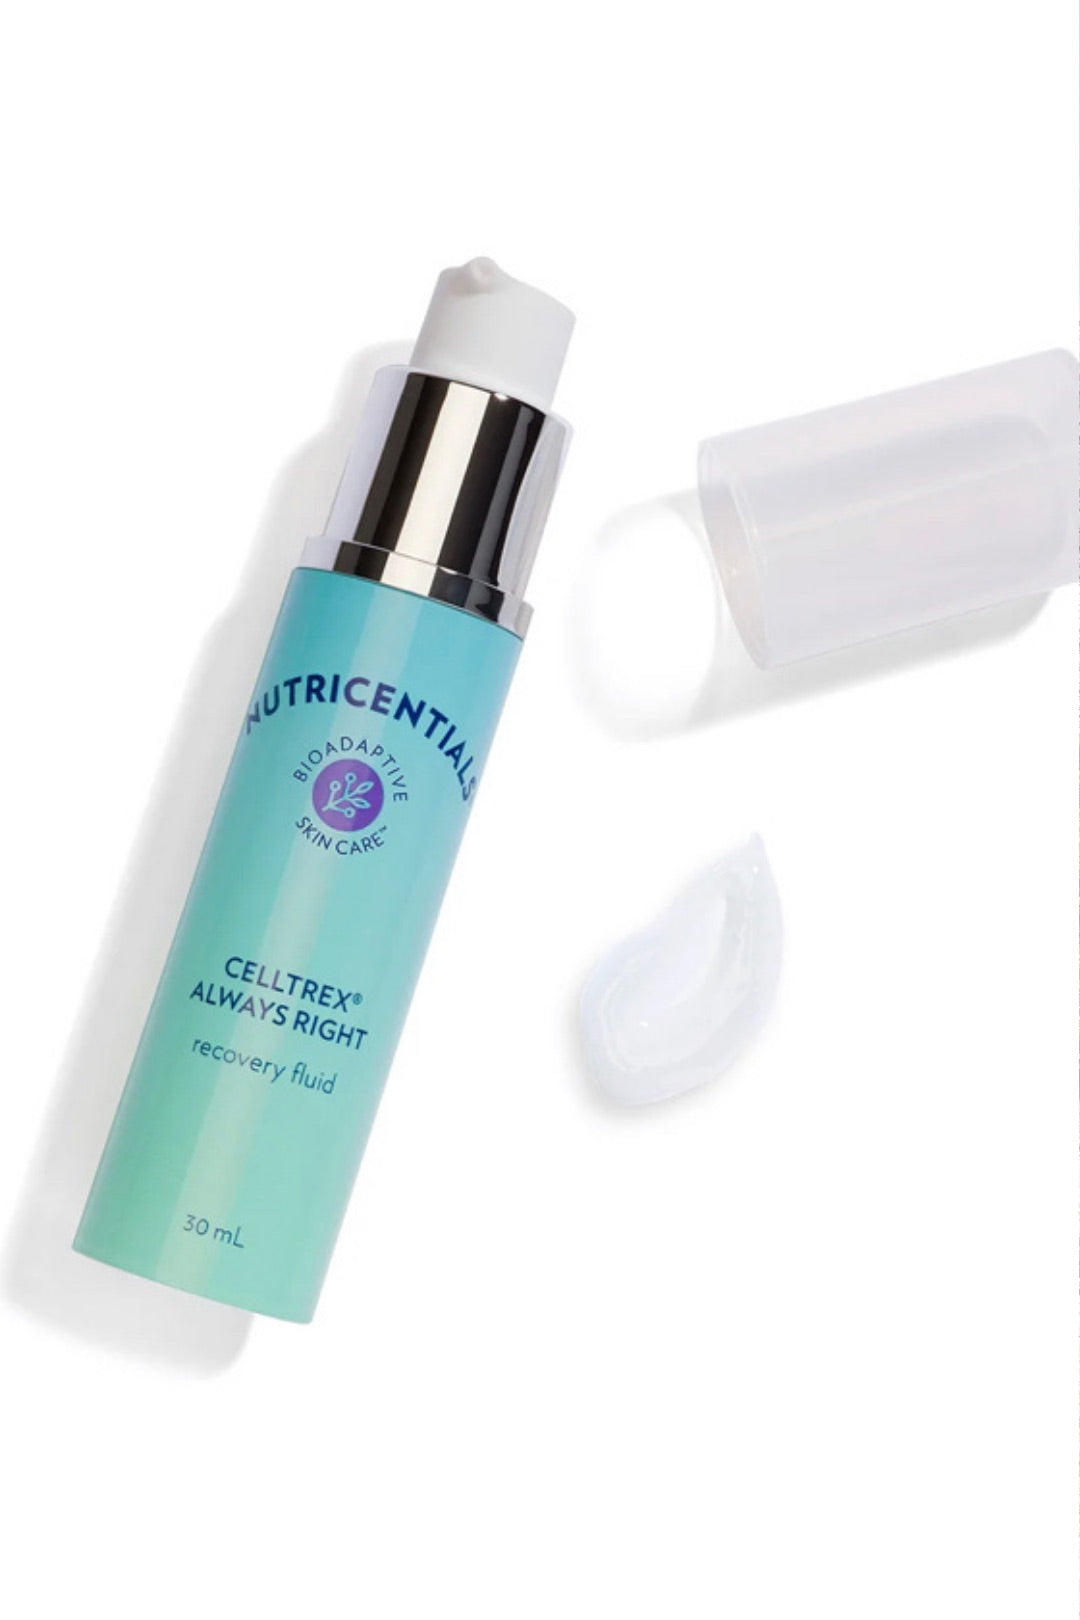 Nutricentials Bioadaptive Skin Care™ Celltrex Always Right Recovery Fluid